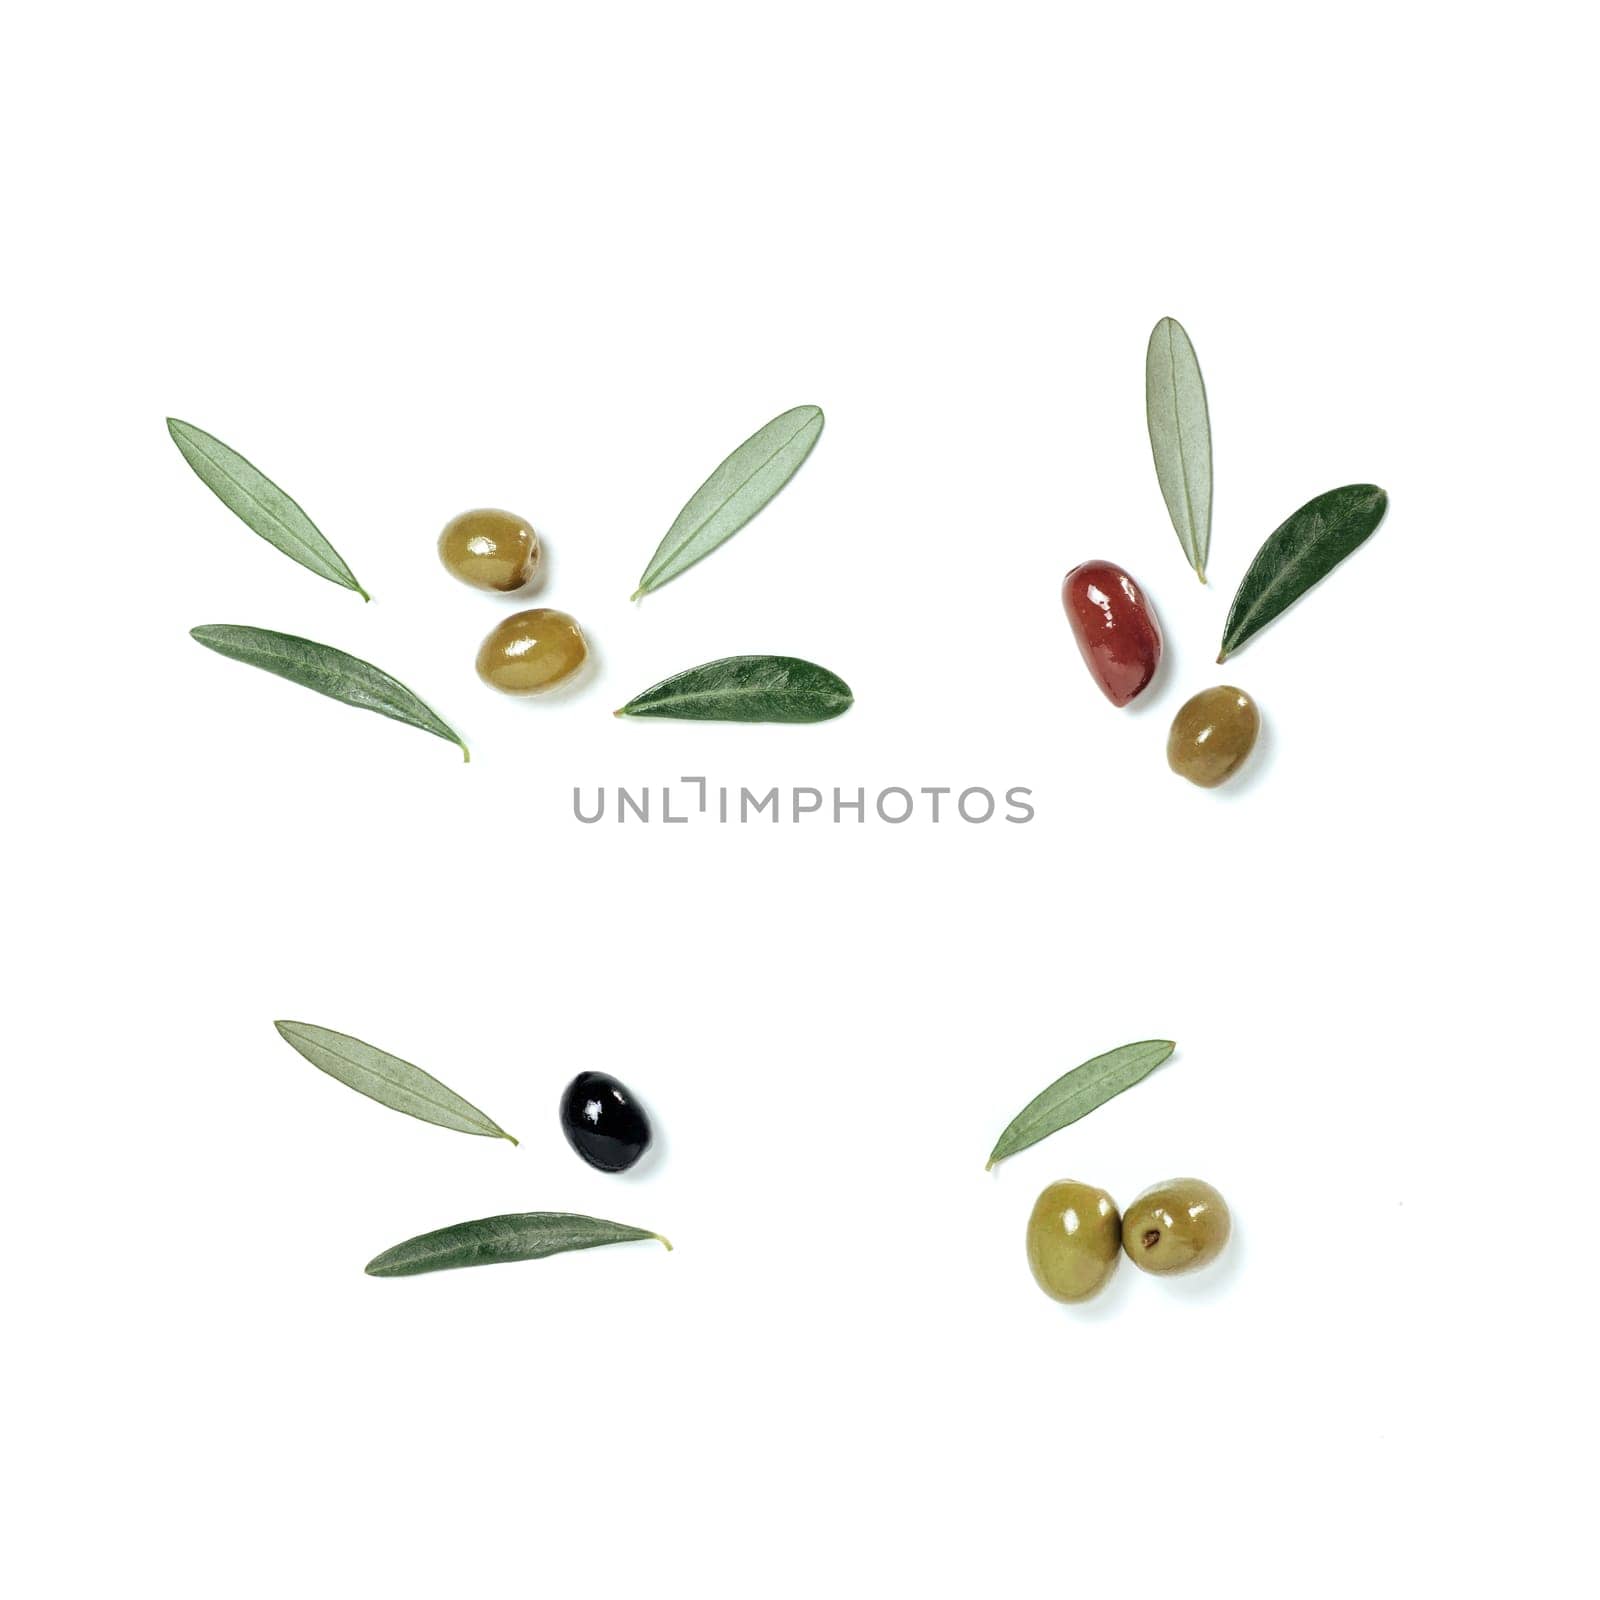 Olives tree leaves and fruits in creative layout composition on white background. Top view or flat lay. Olives branches set isolated on white with copy space